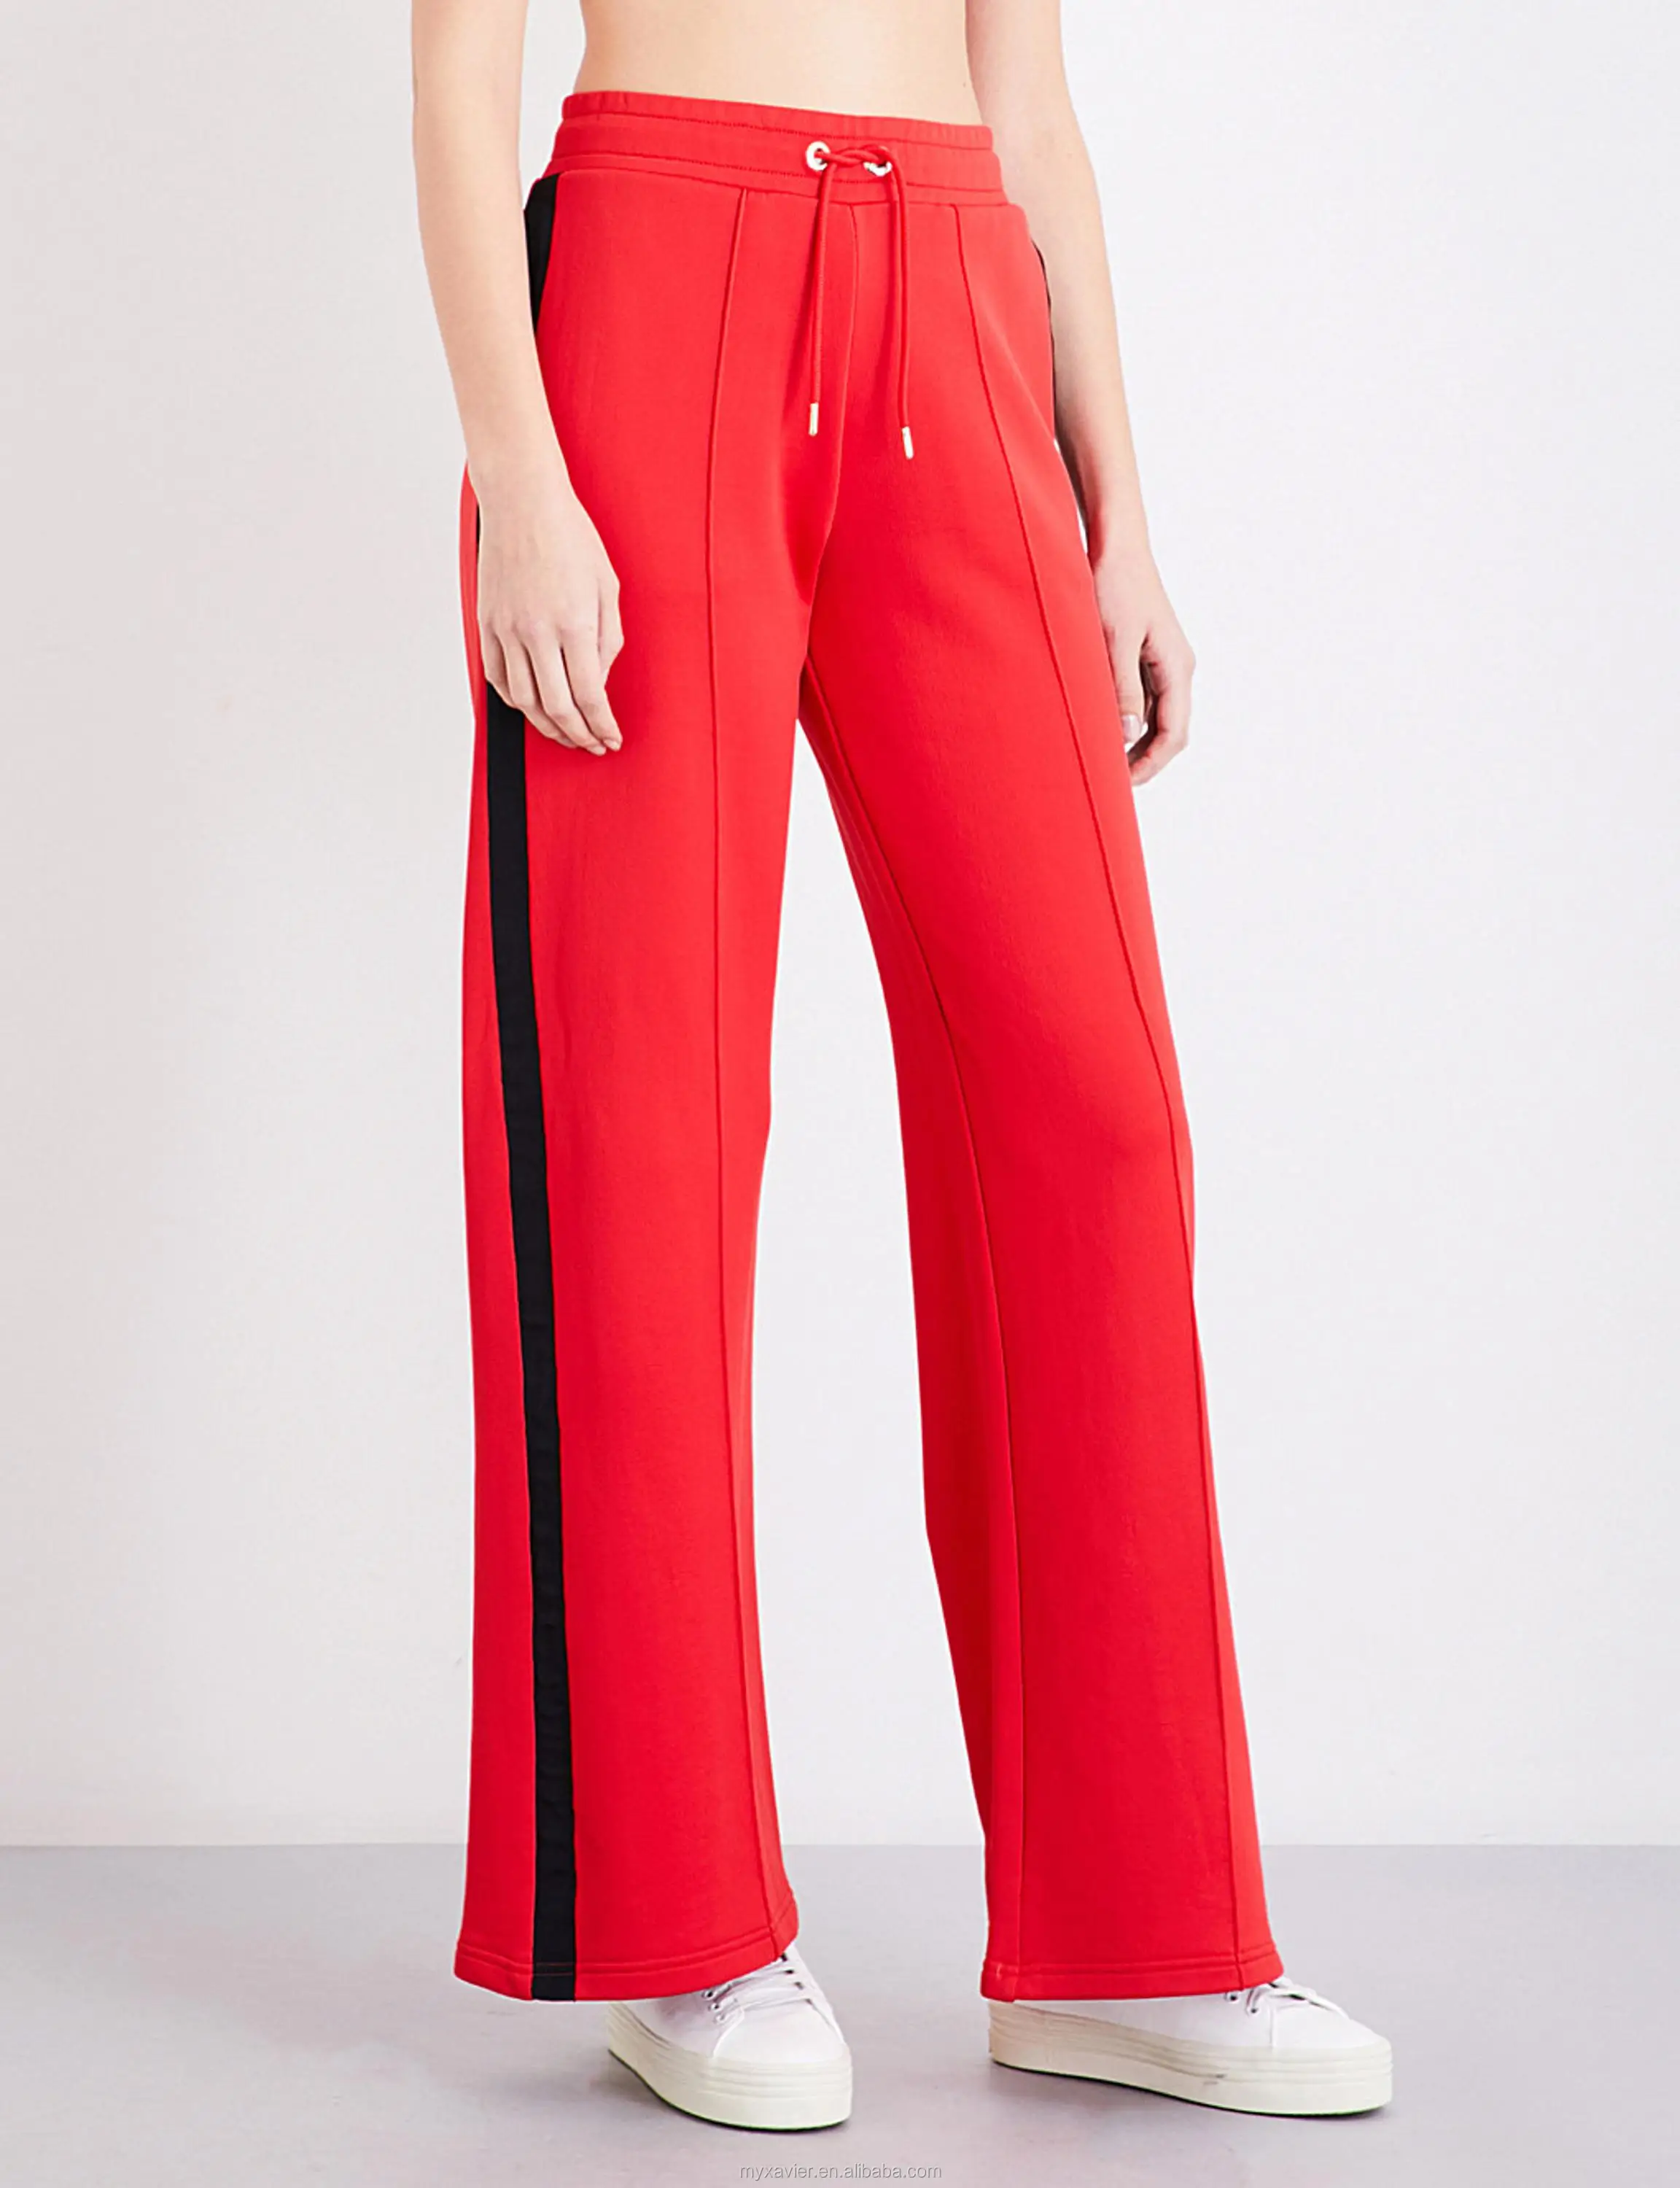 Red Flared High-rise Jersey Woman Jogging Pants Bottoms Design With A ...